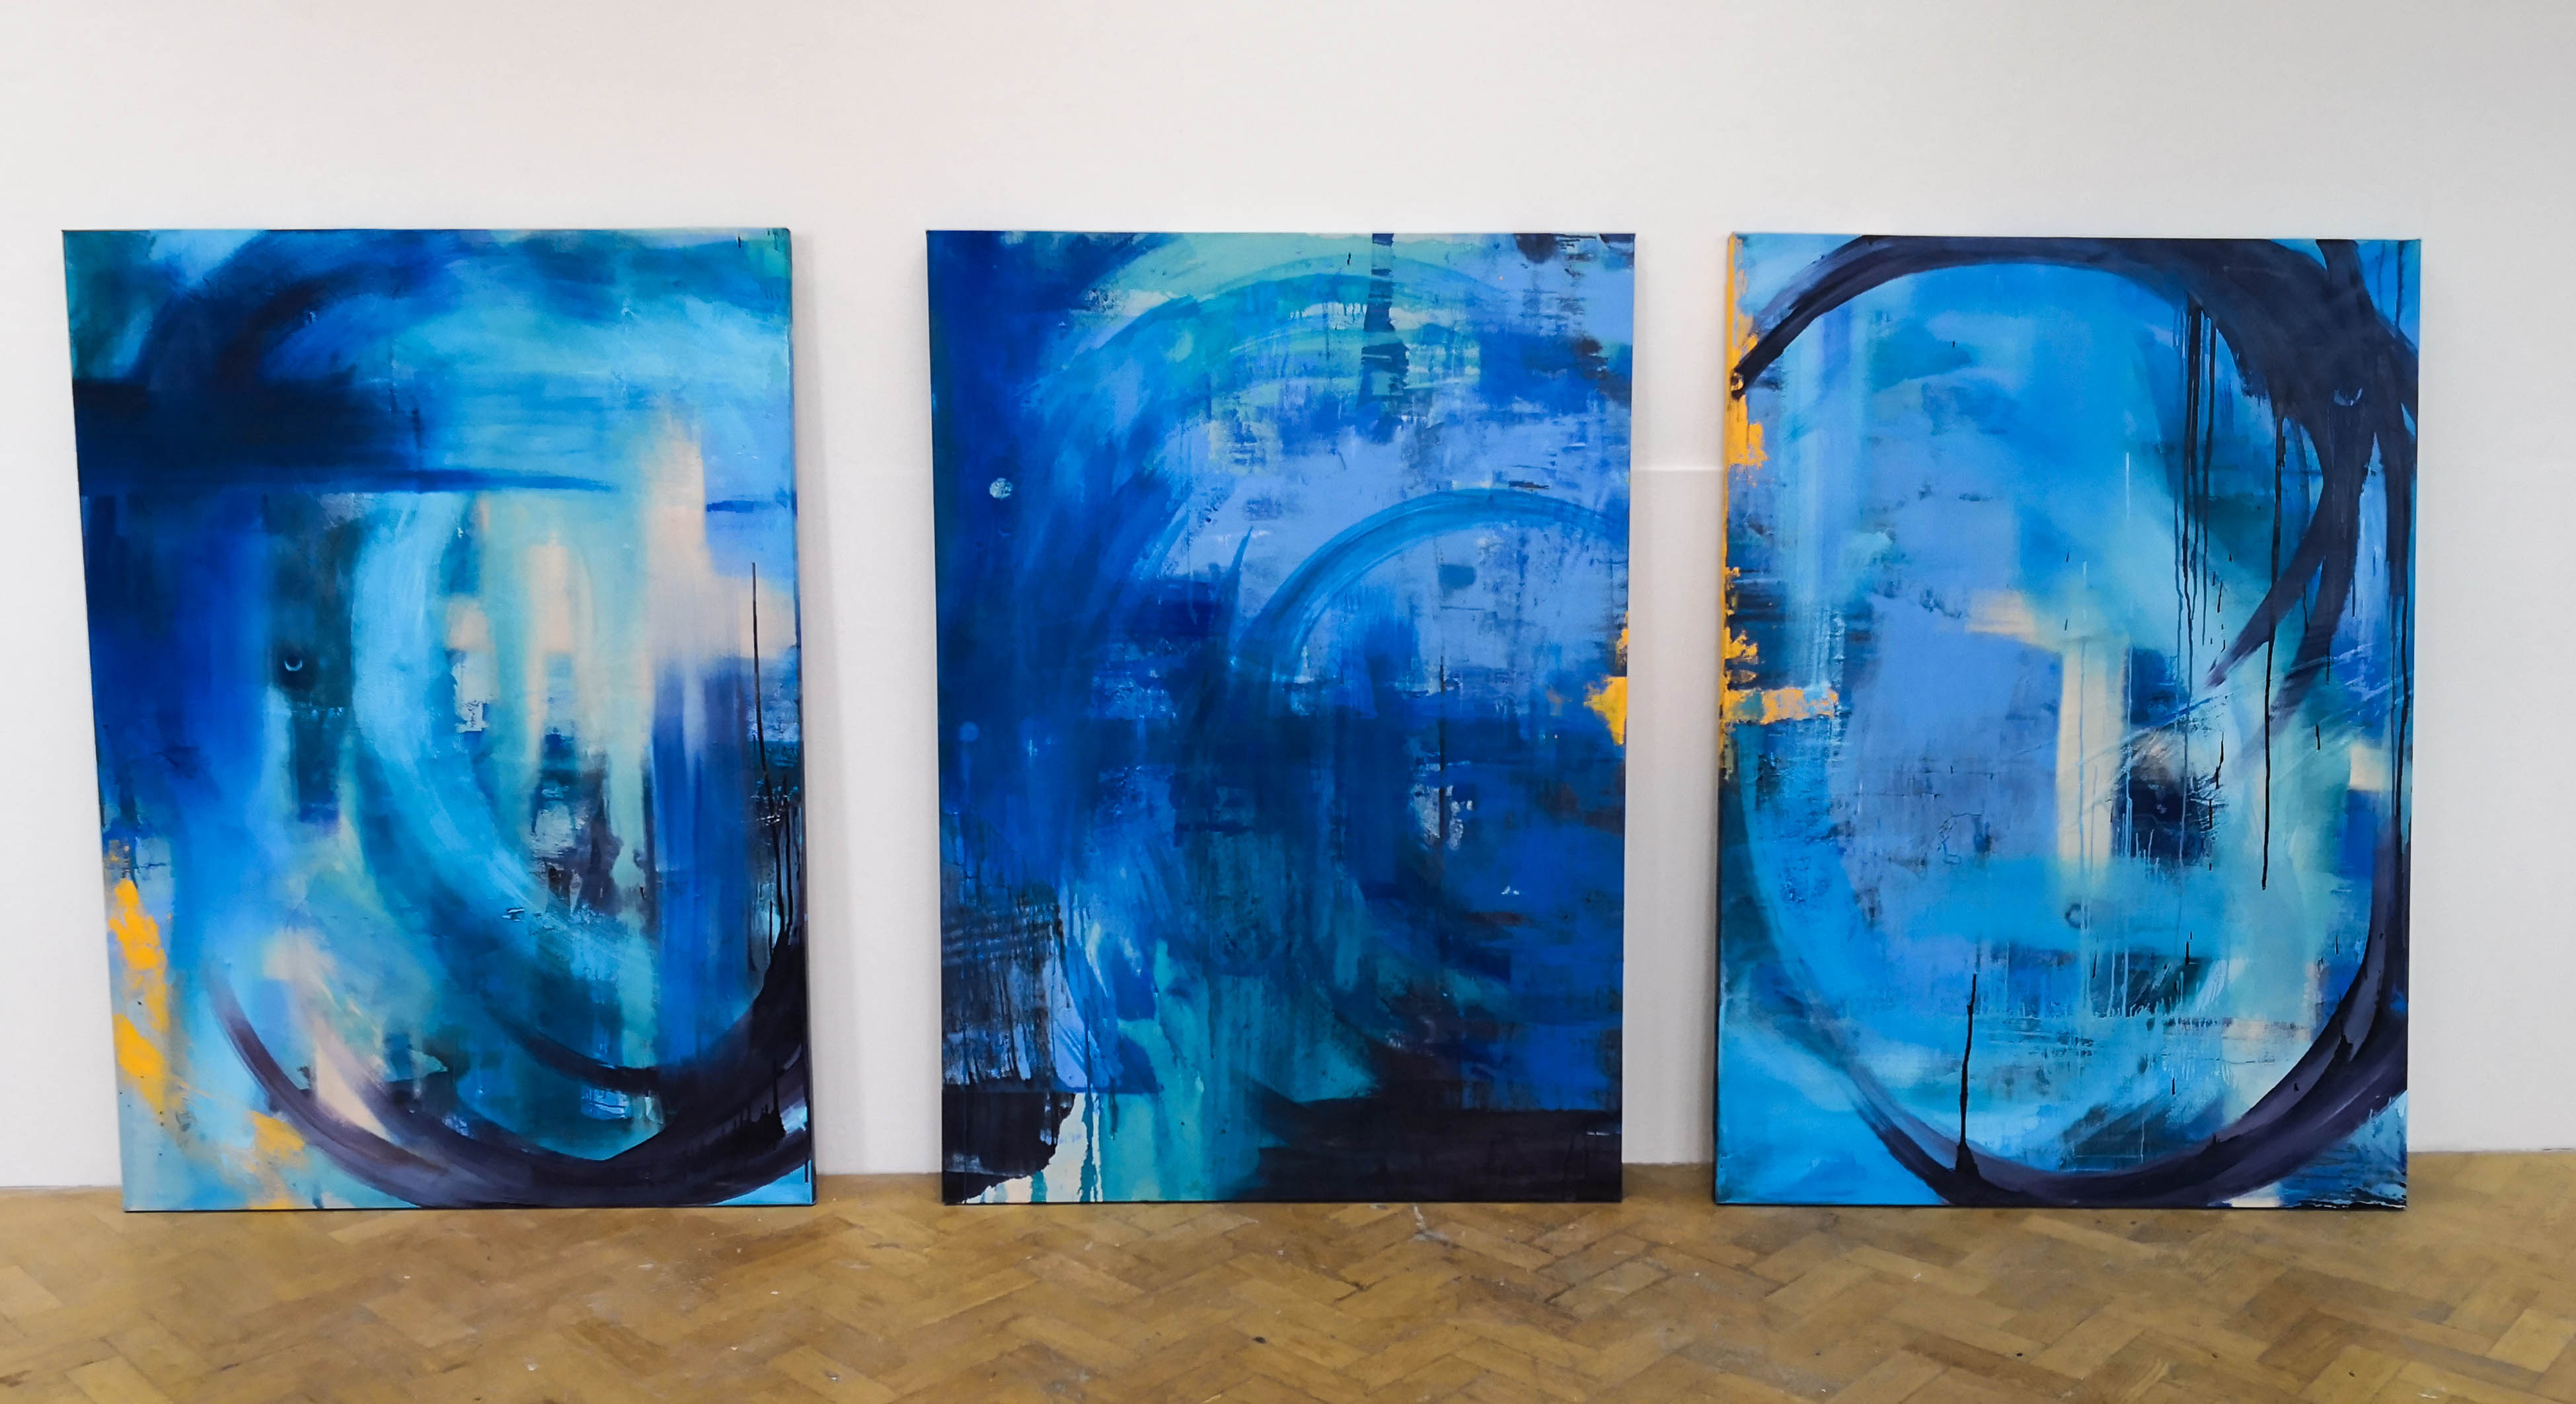 Blue Series 3. Oil on canvas. Triptych. 190.8x114.5cm. For Sale.